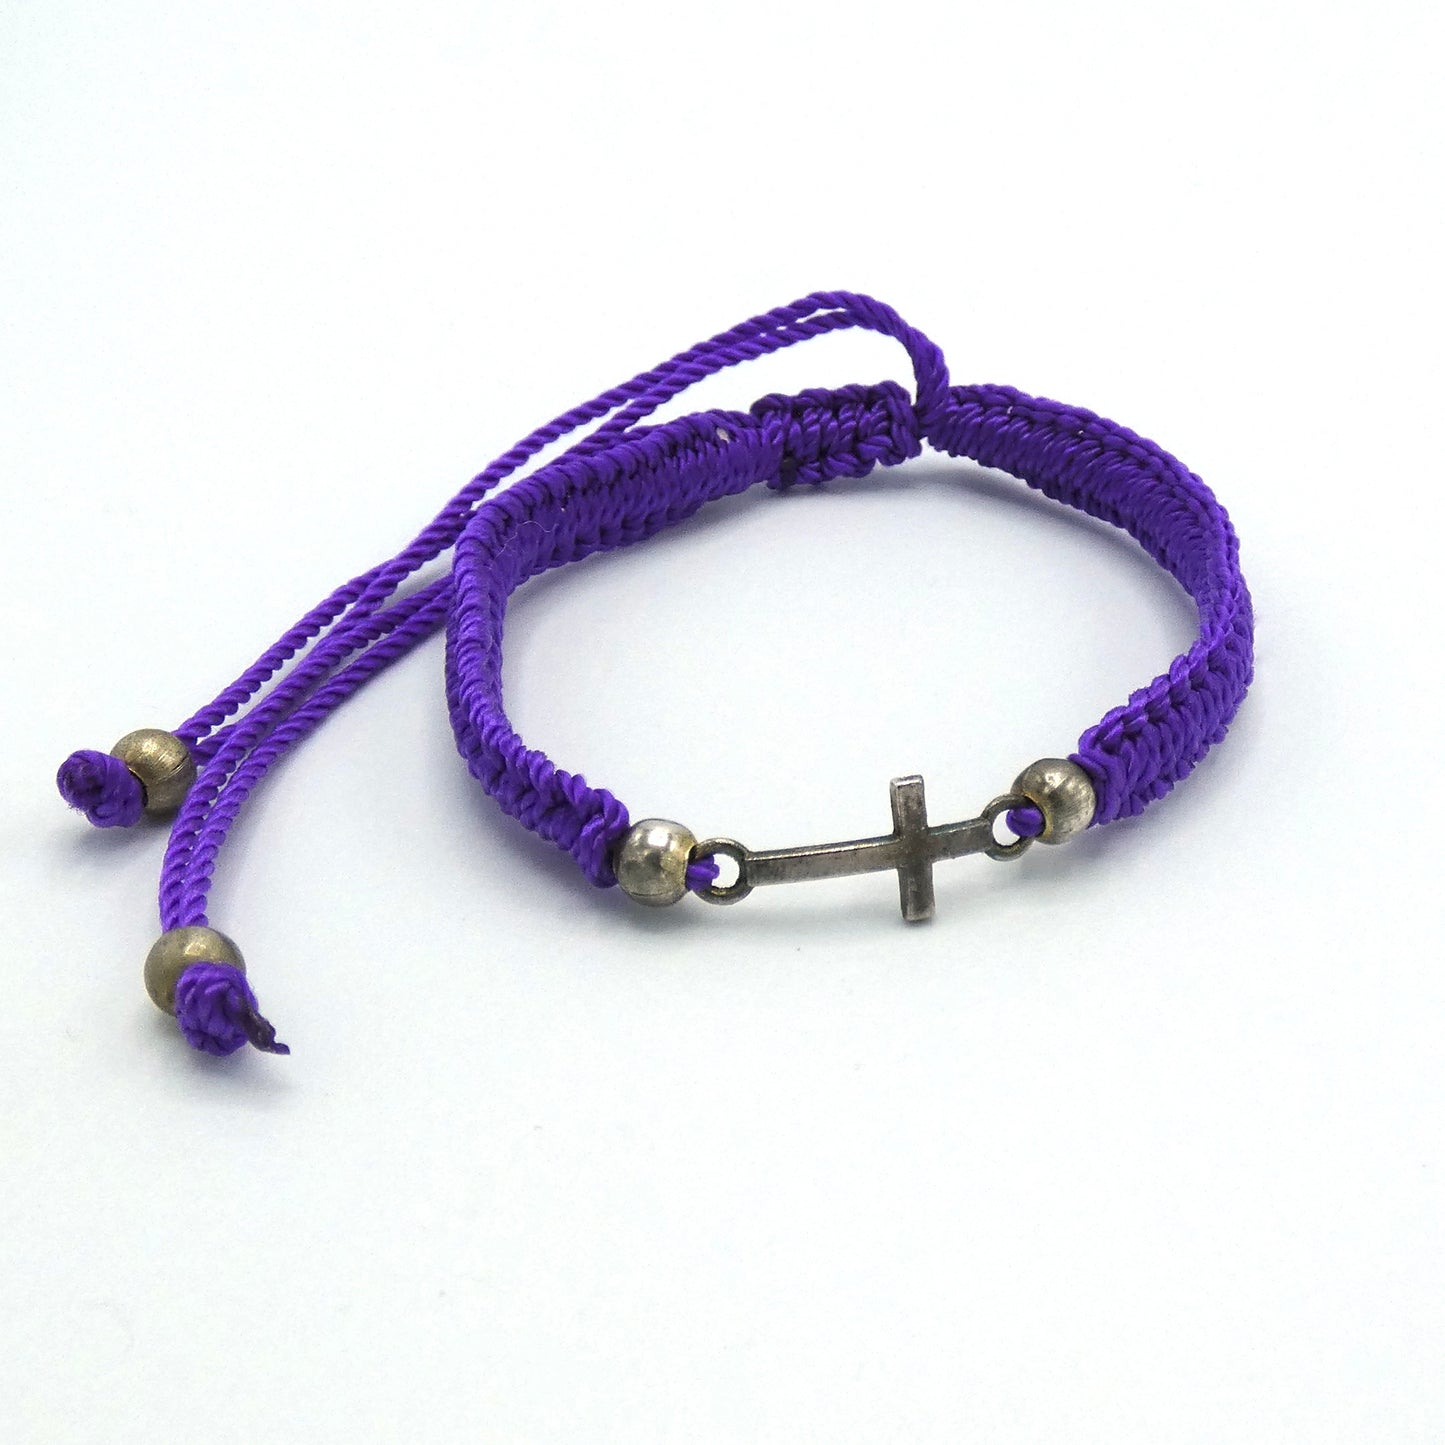 Braided Bracelet of Assorted Colors with Metal Cross